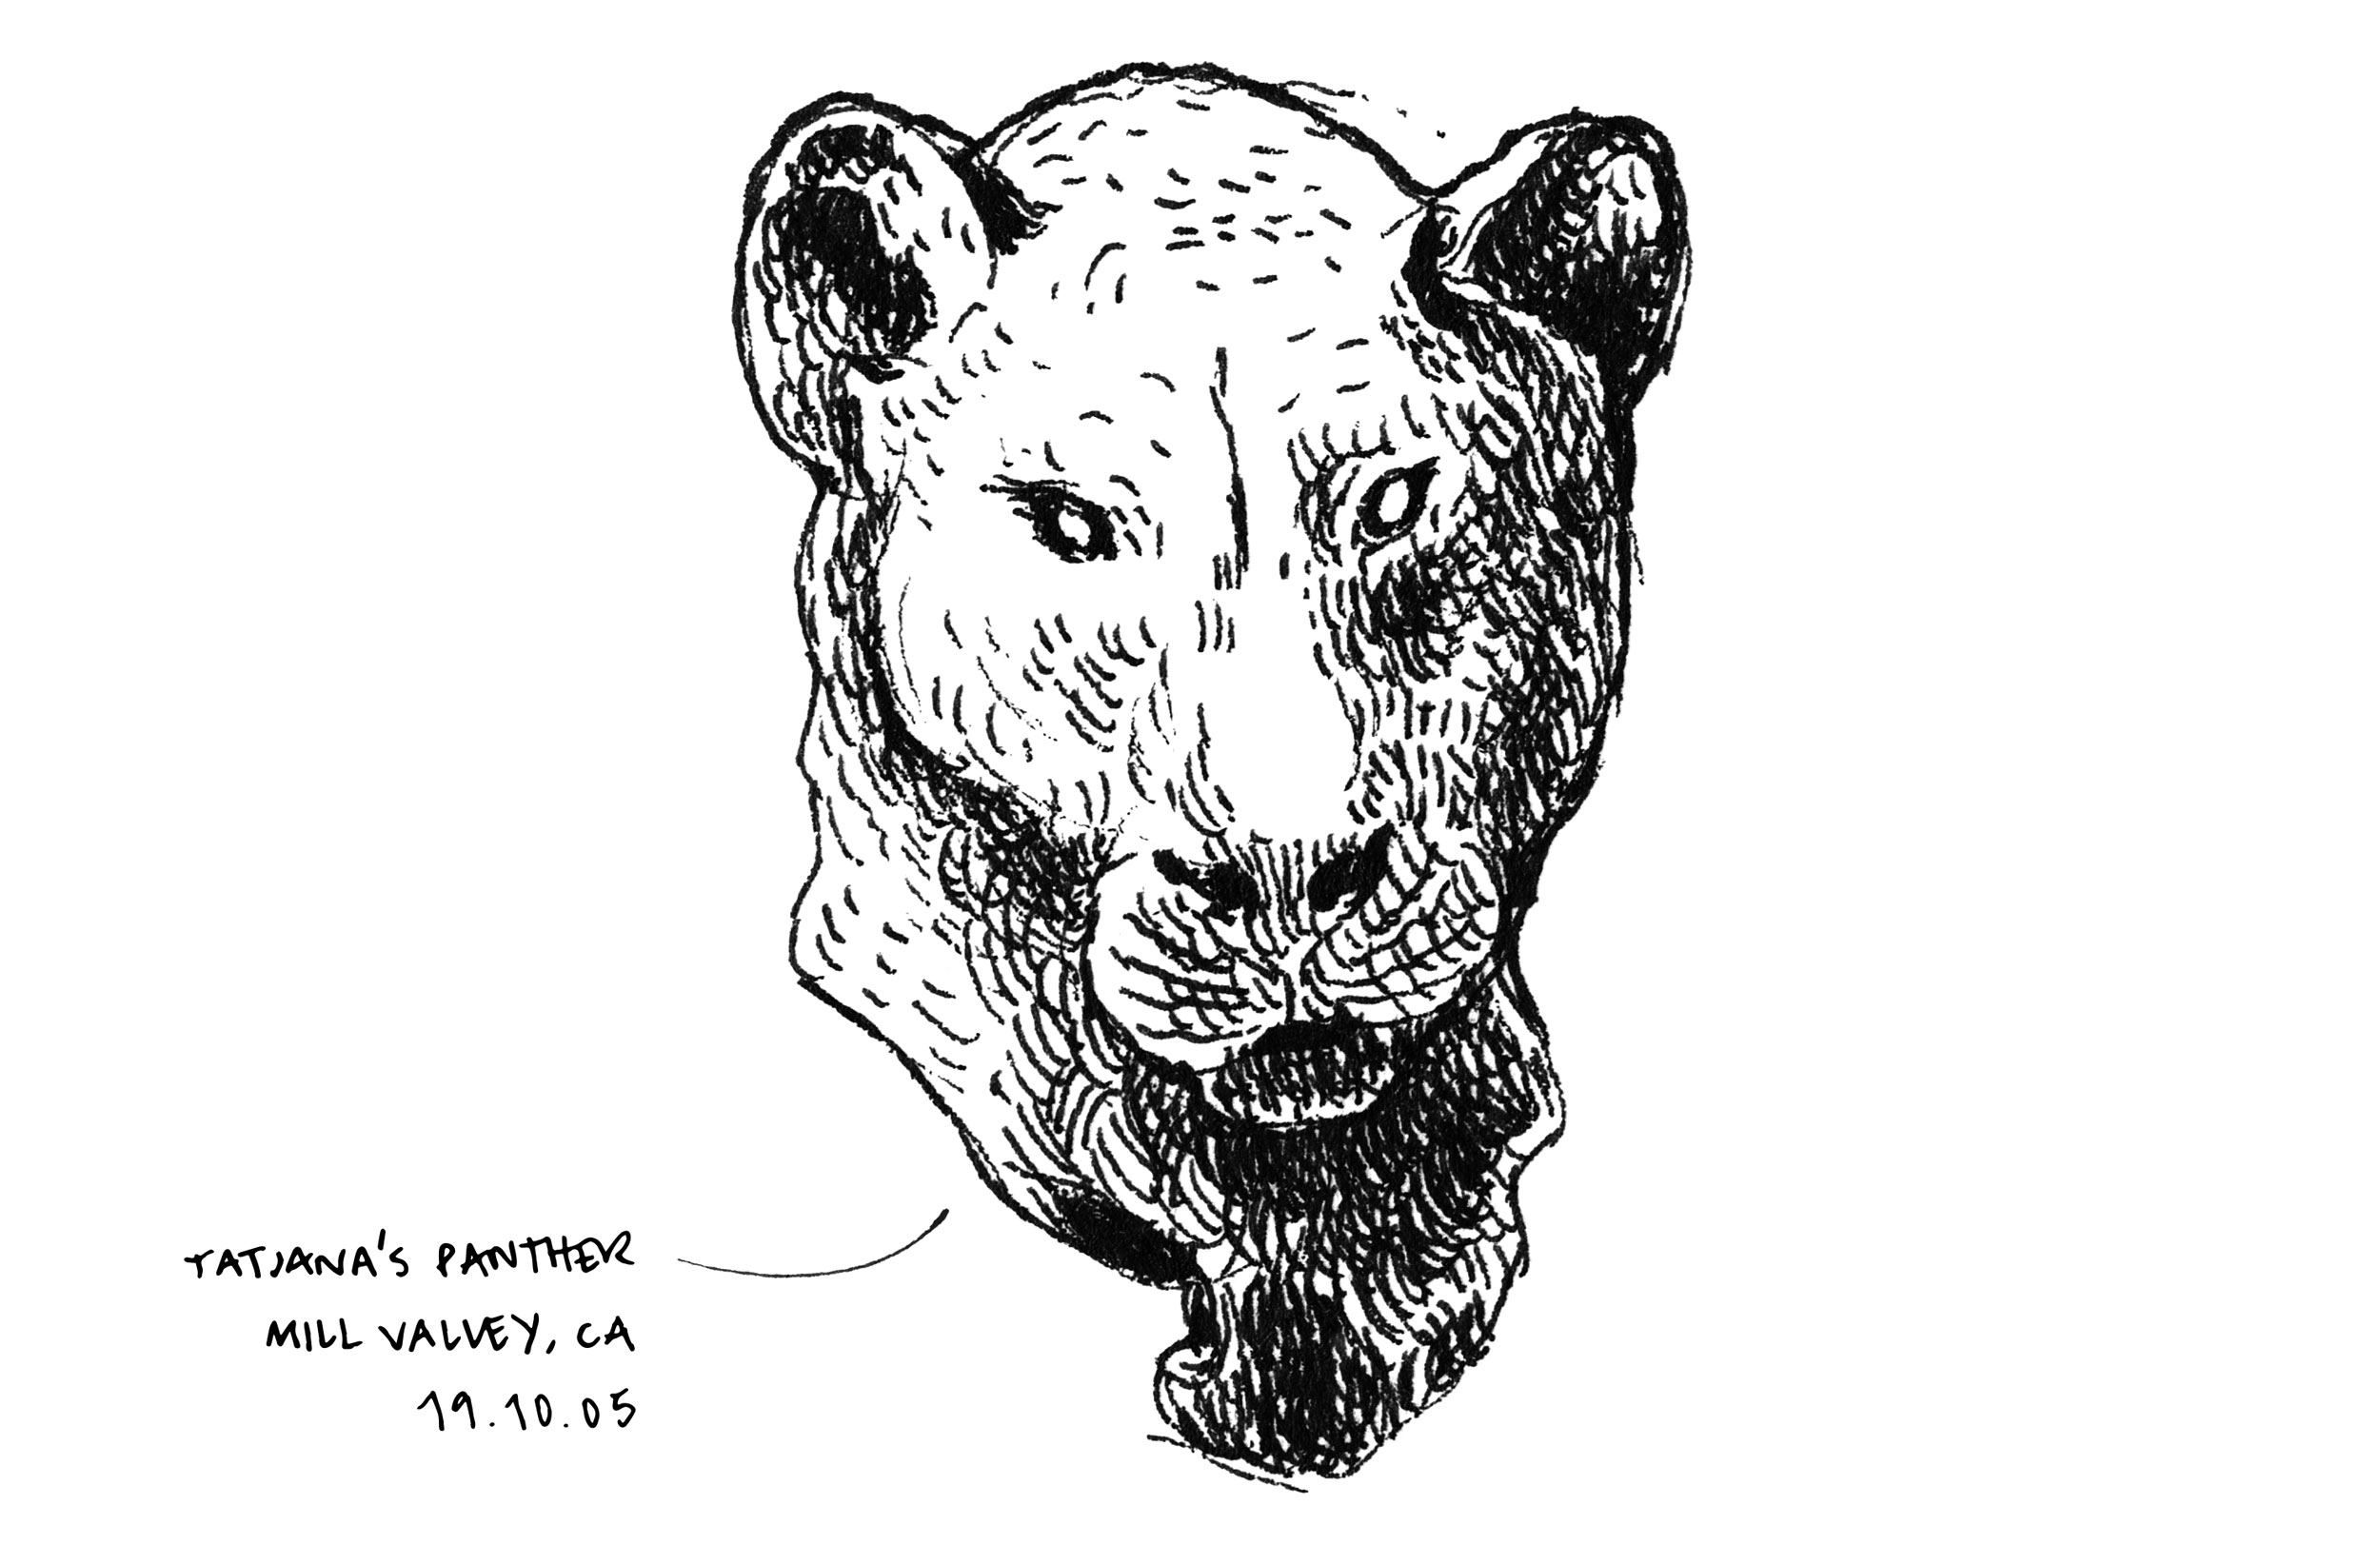 Sketch of panther sculpture.